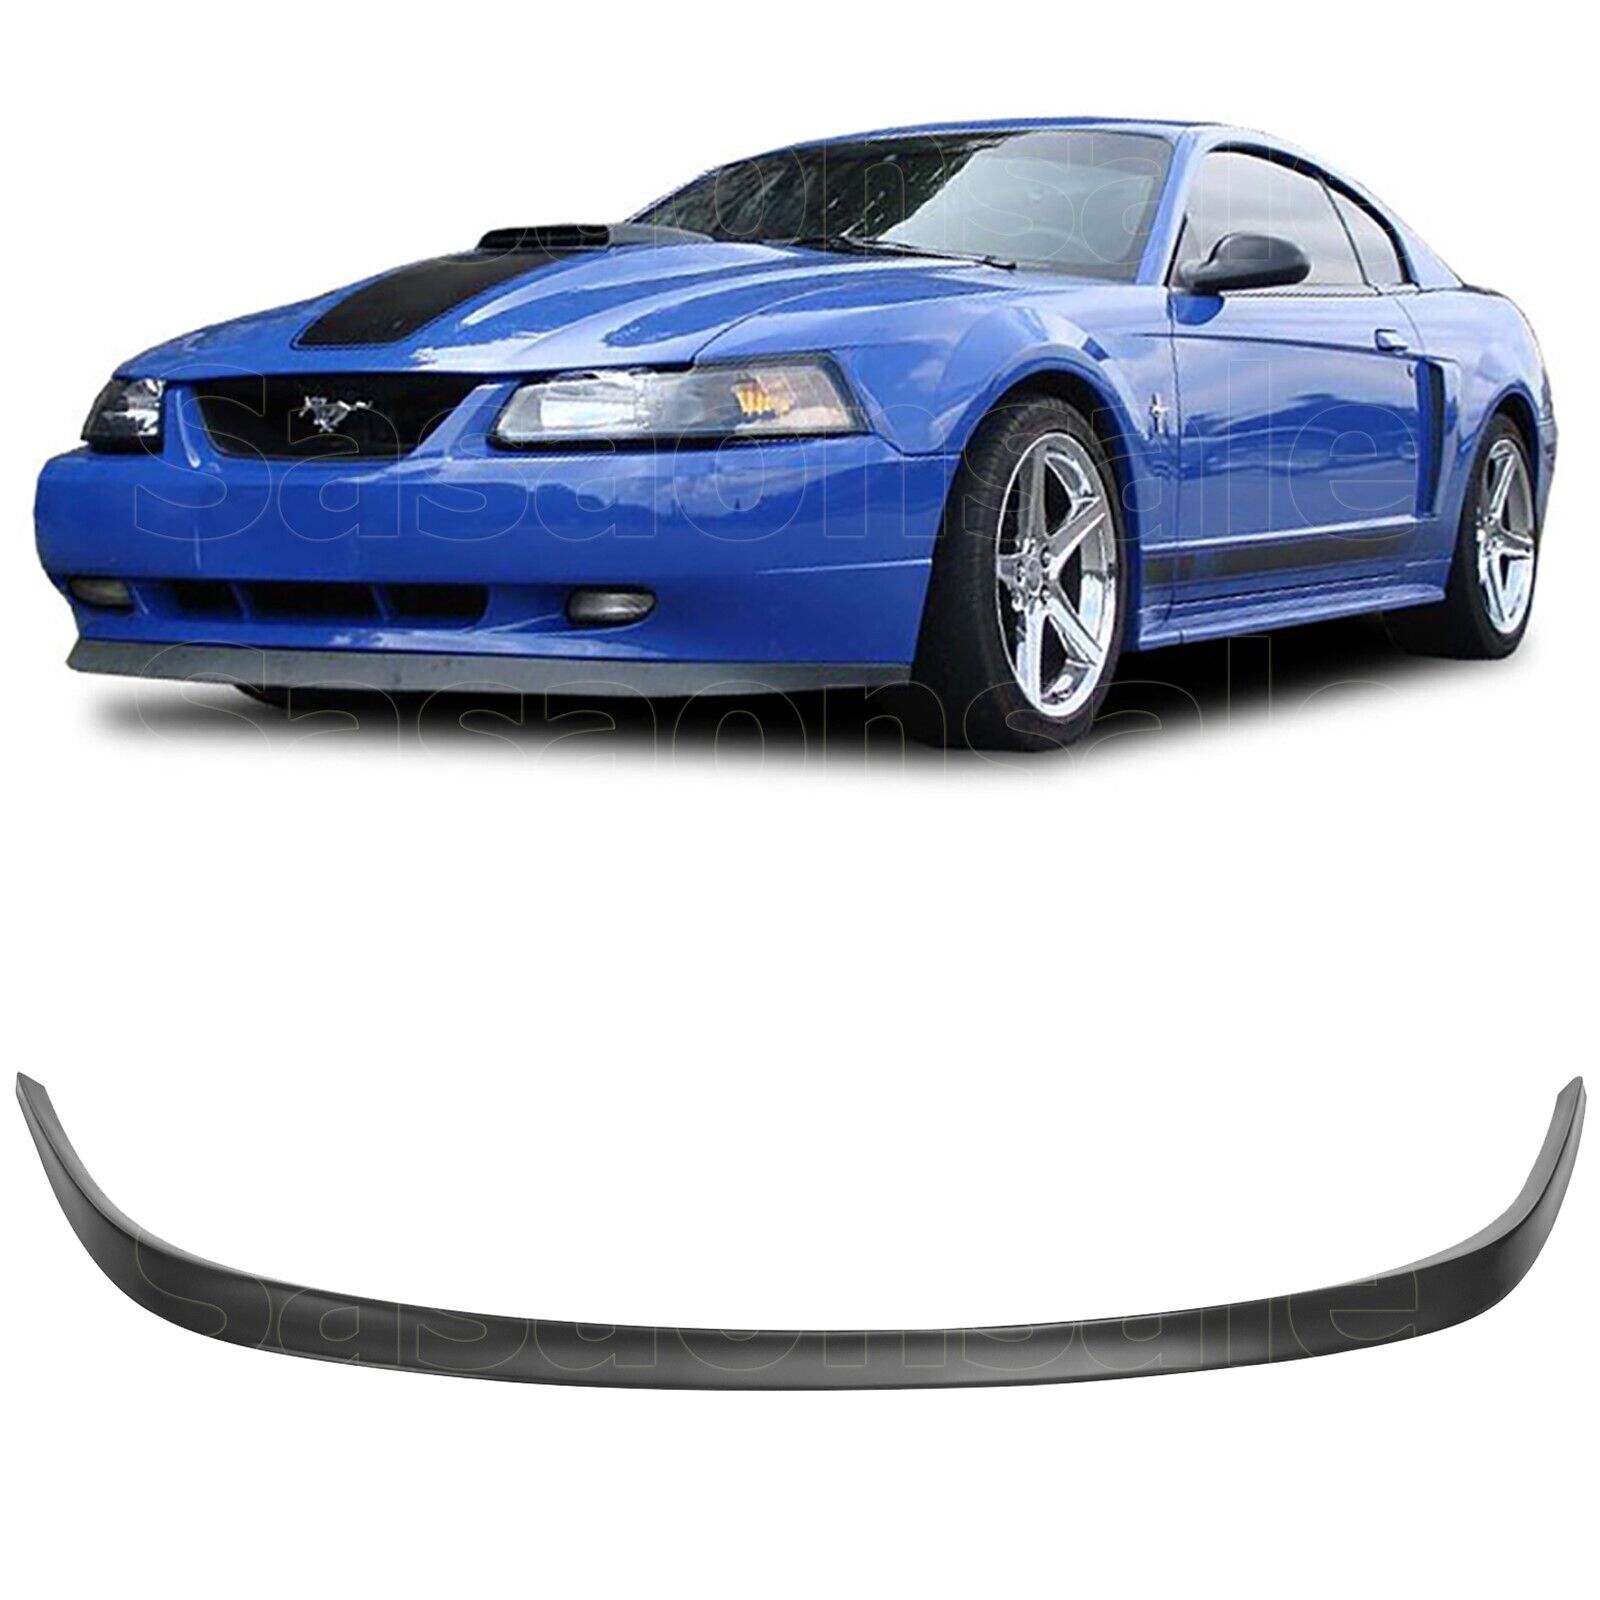 [SASA] Made for 1999-2004 Ford Mustang GT OE Mach 1 PU Front Bumper Lip Spoiler